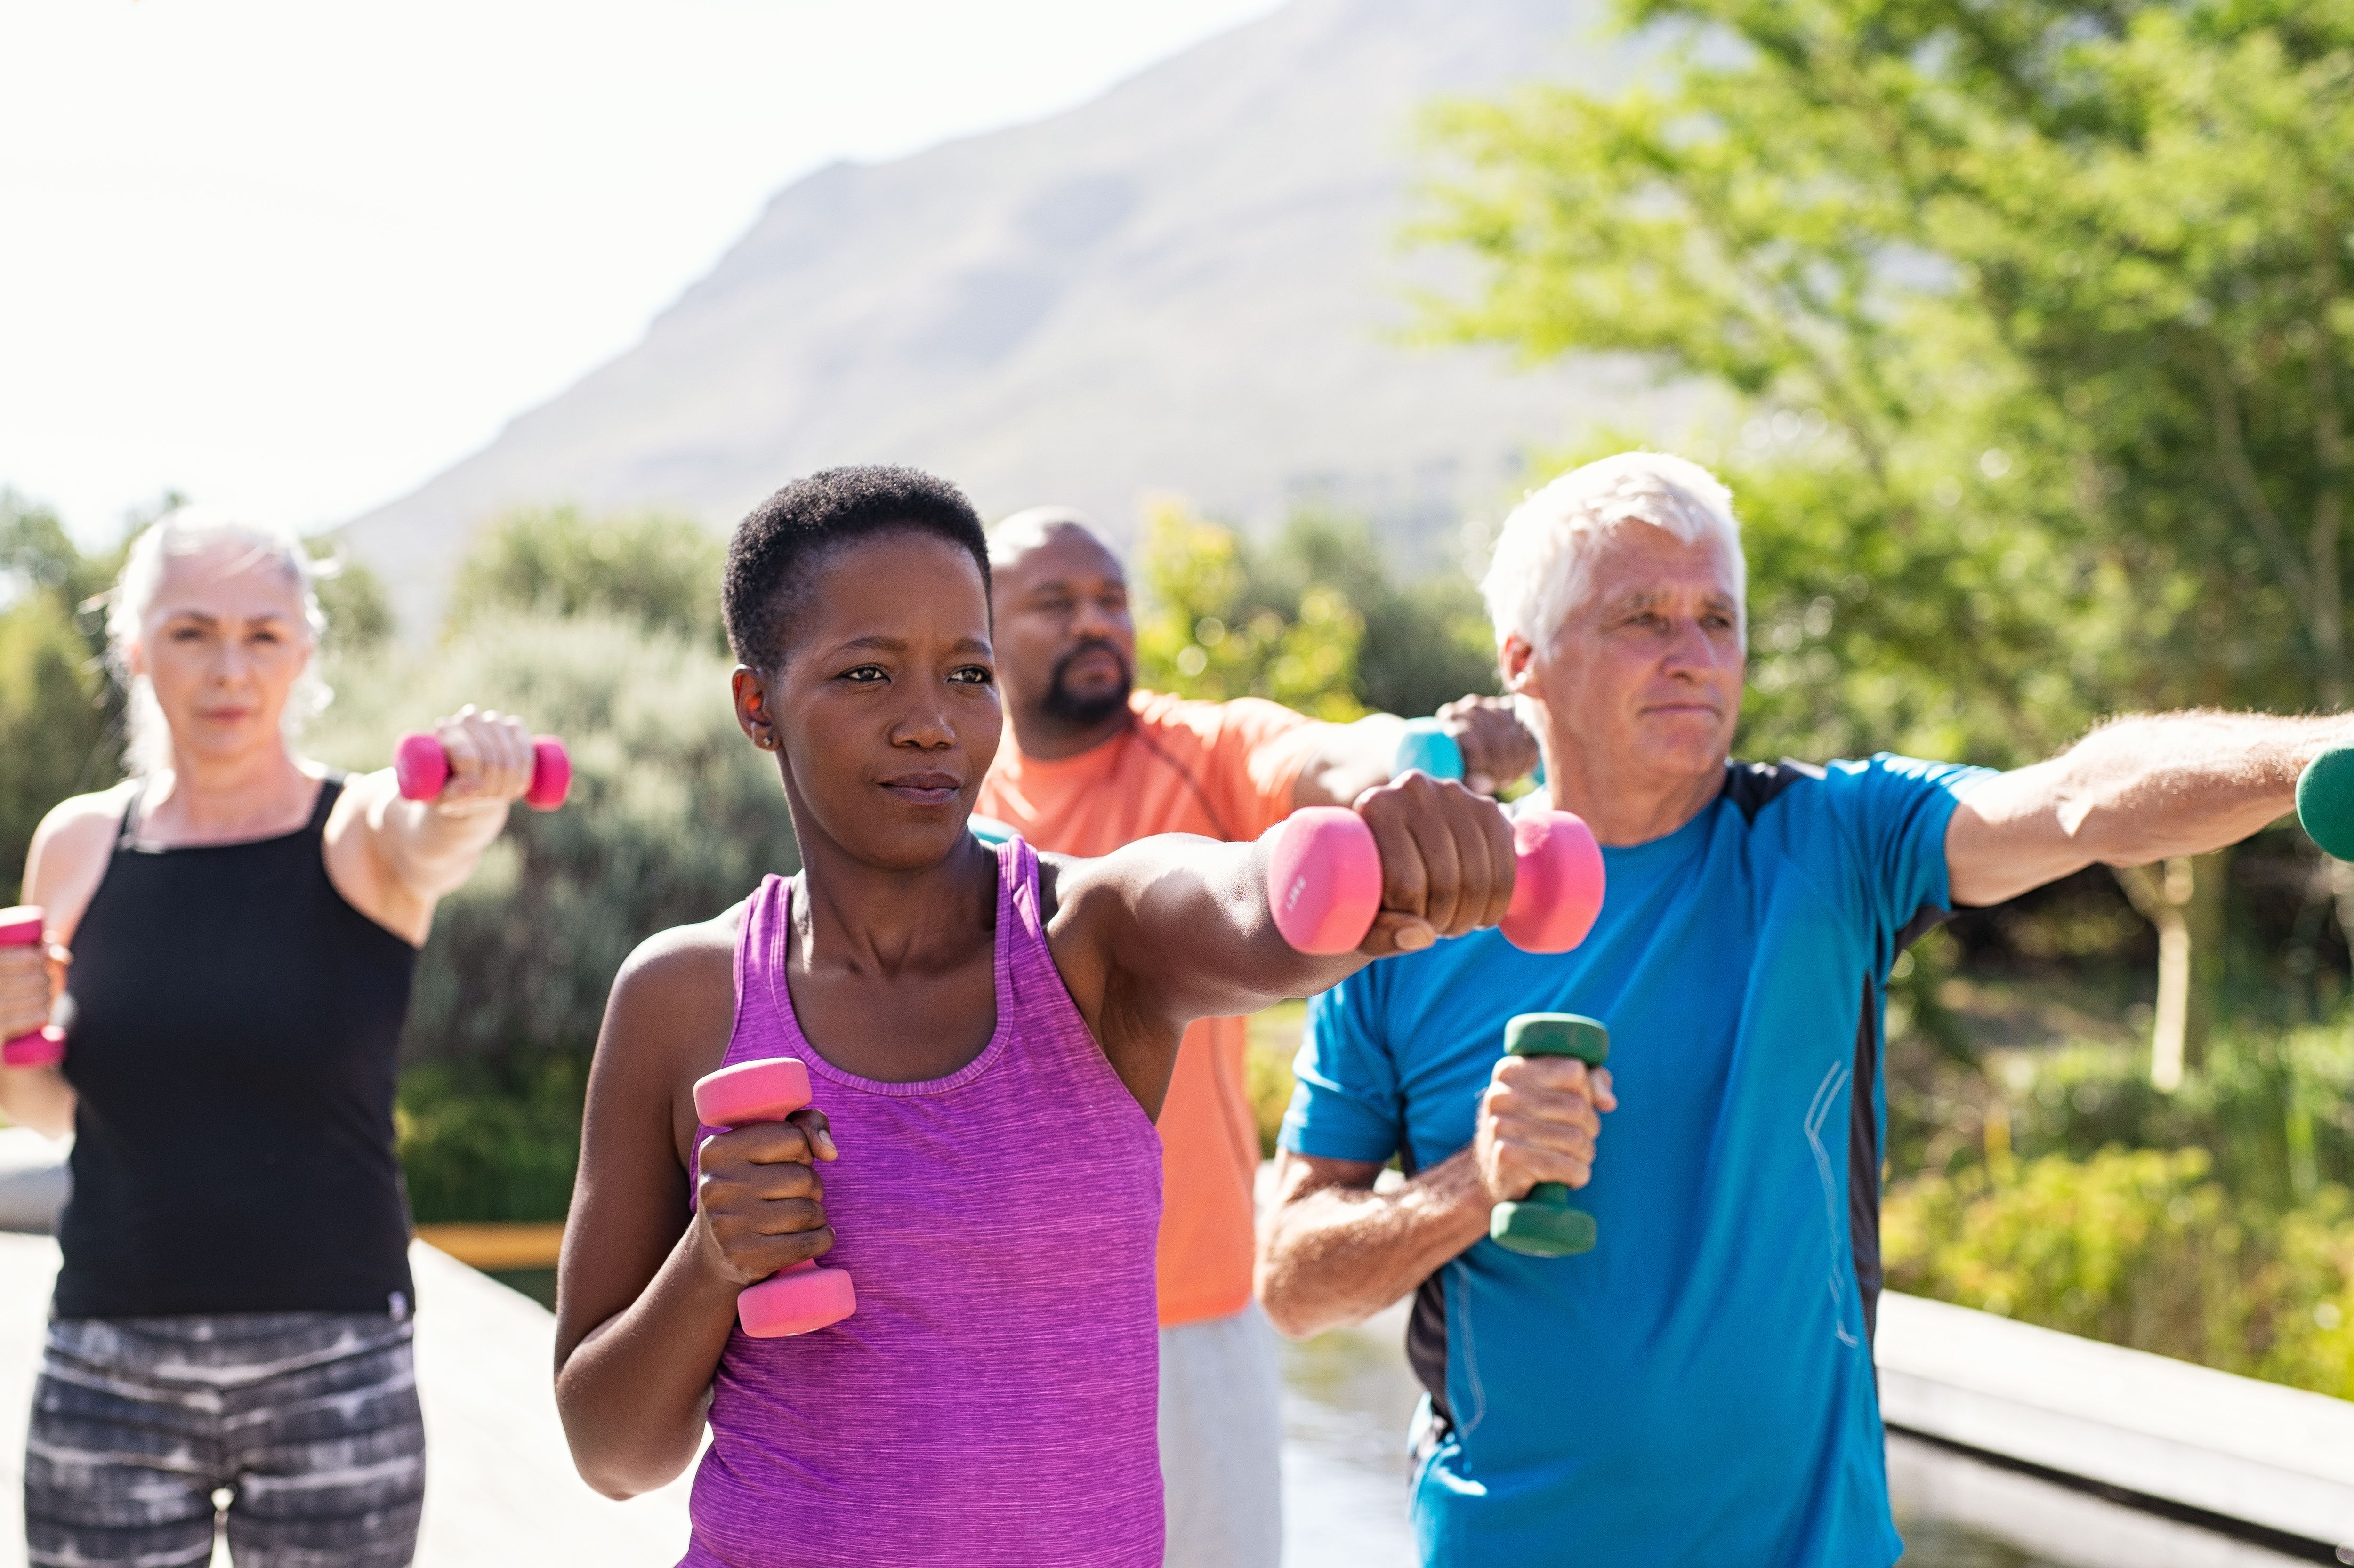 group of older adults outside exercising with weights